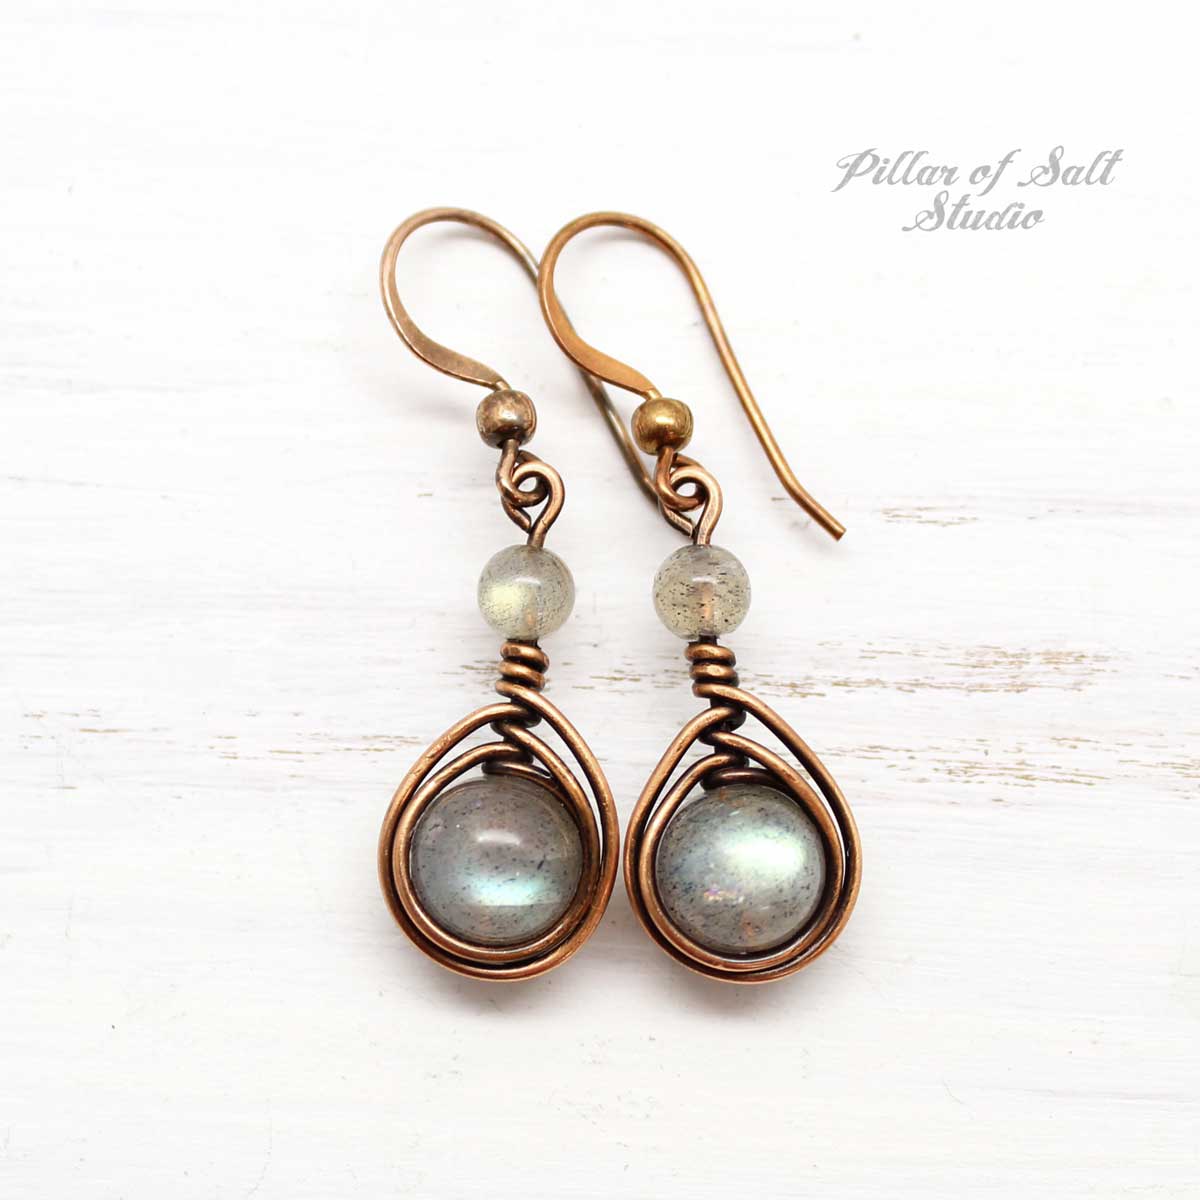 Copper Wire Wrapped Earrings with Labradorite Stones